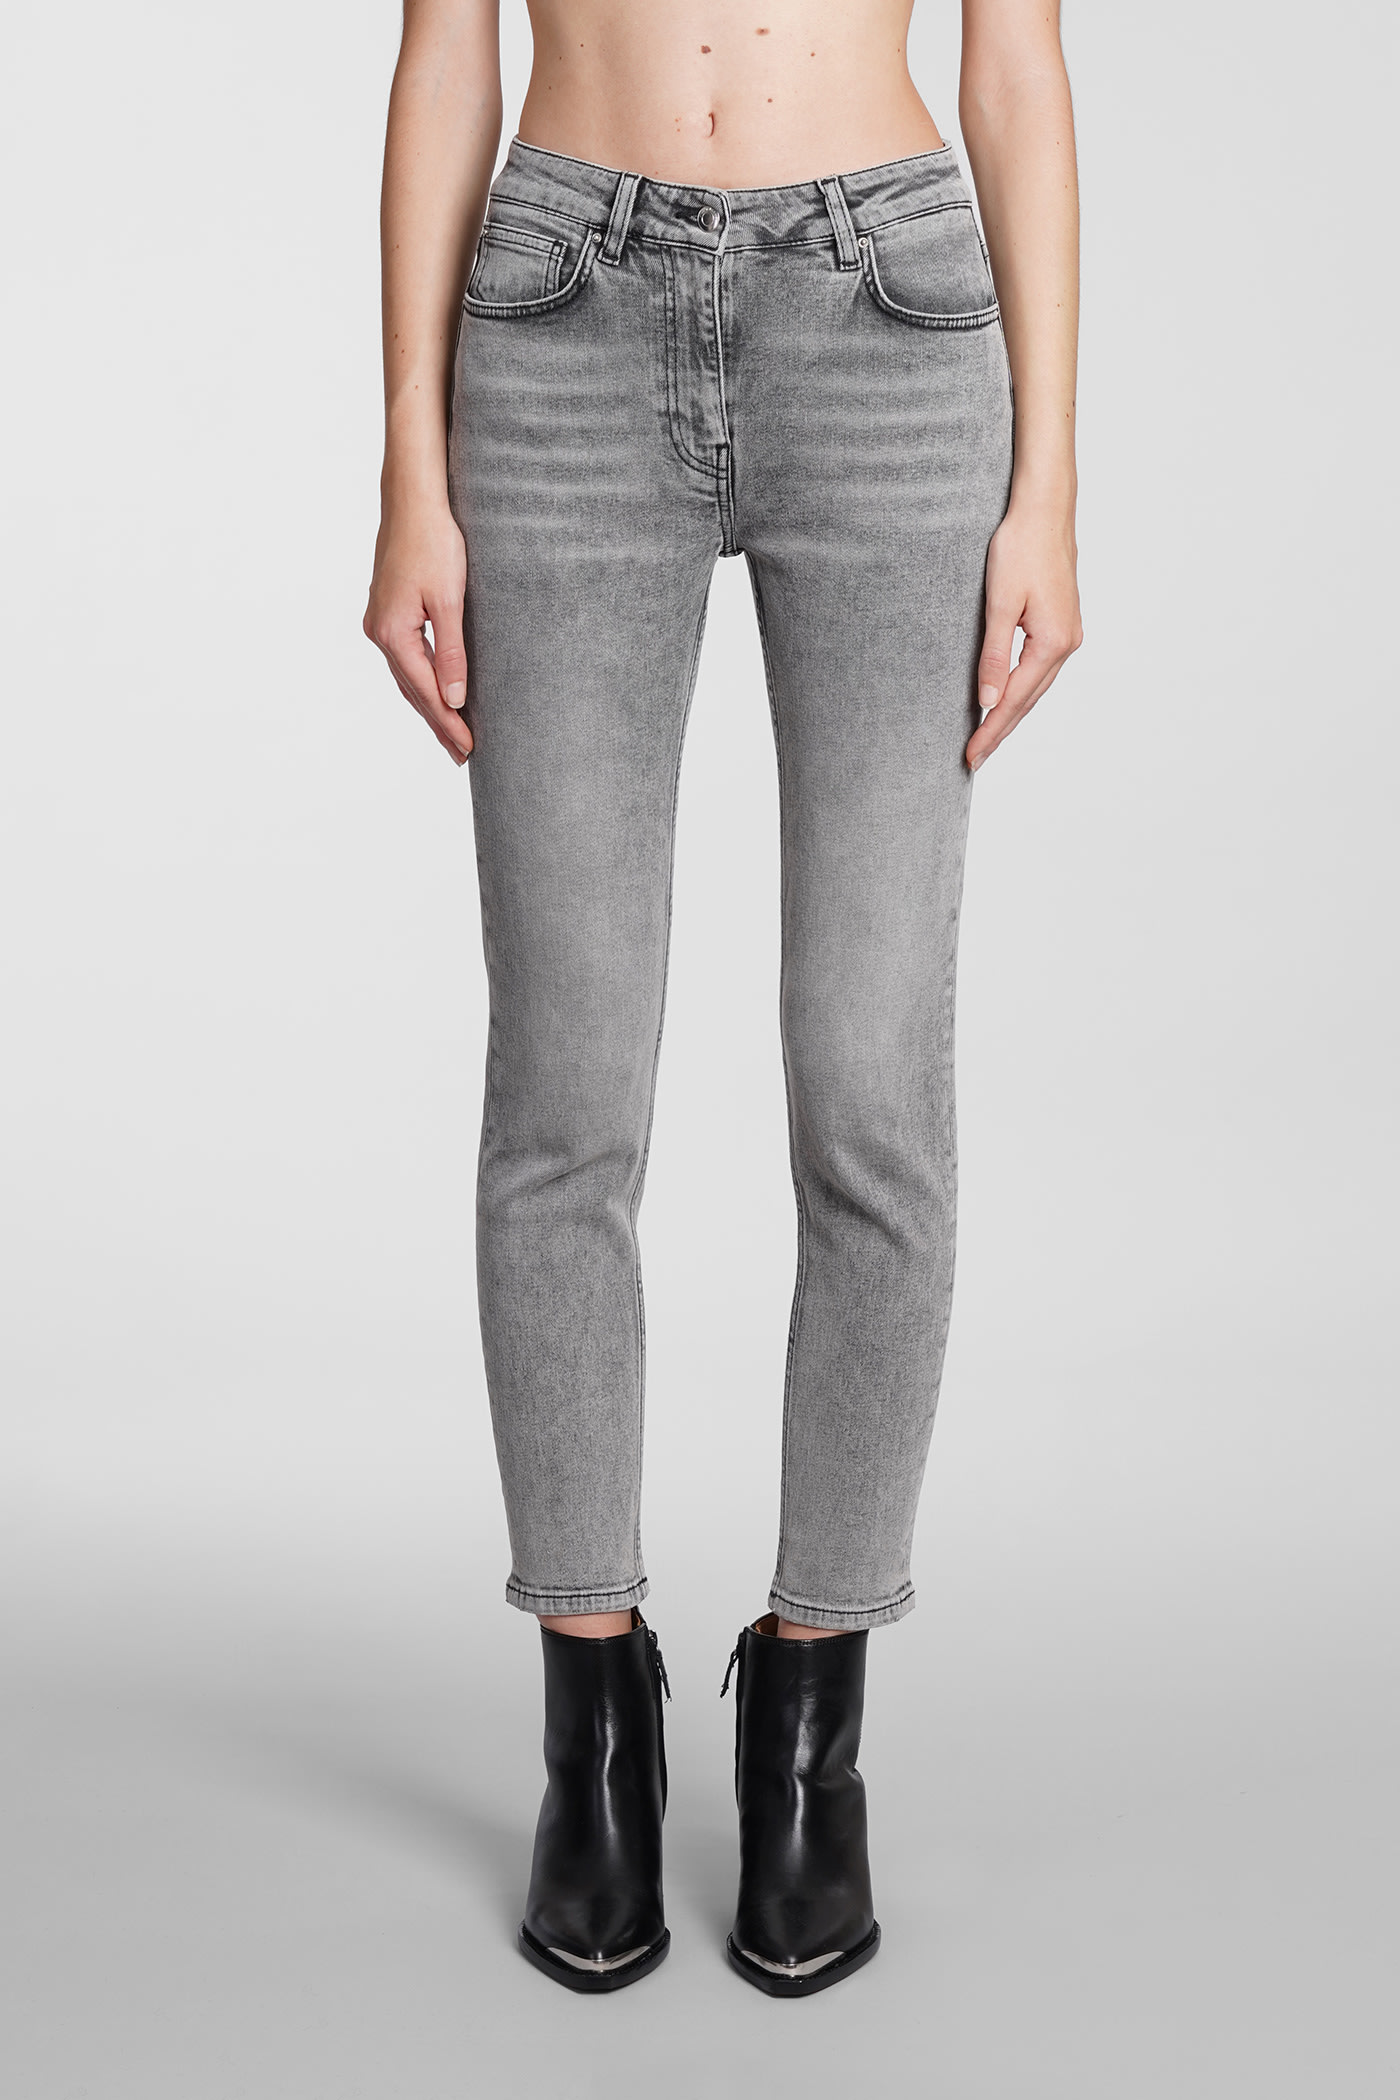 IRO GALLOWAY JEANS IN GREY COTTON